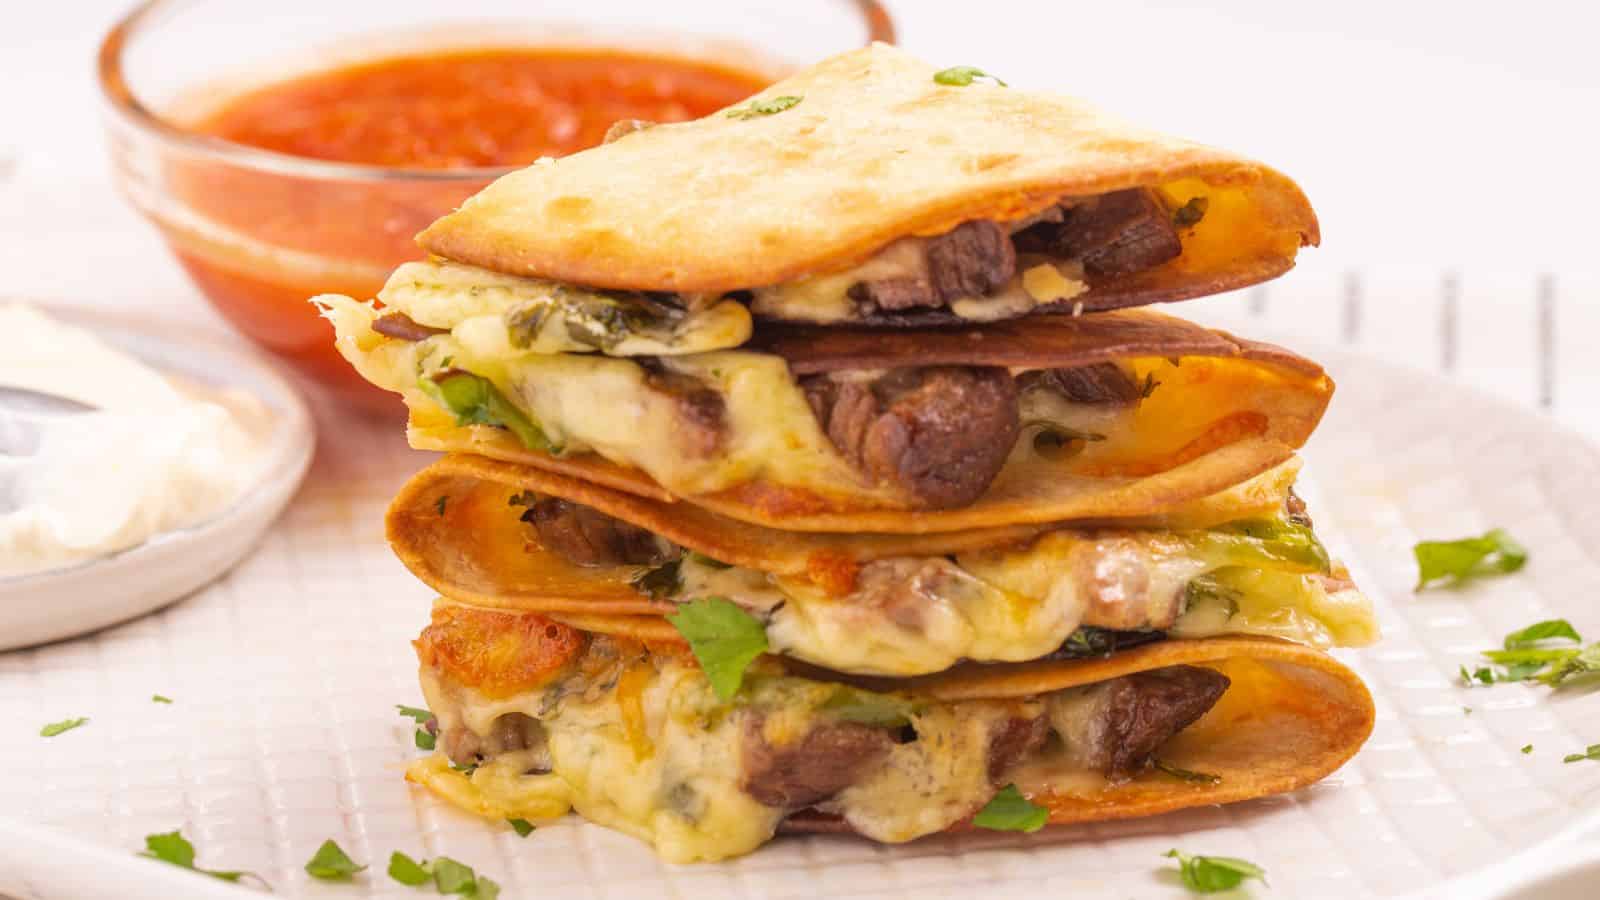 Stack of quesadillas filled with cheese and meat, garnished with herbs, served with dips on a white plate.